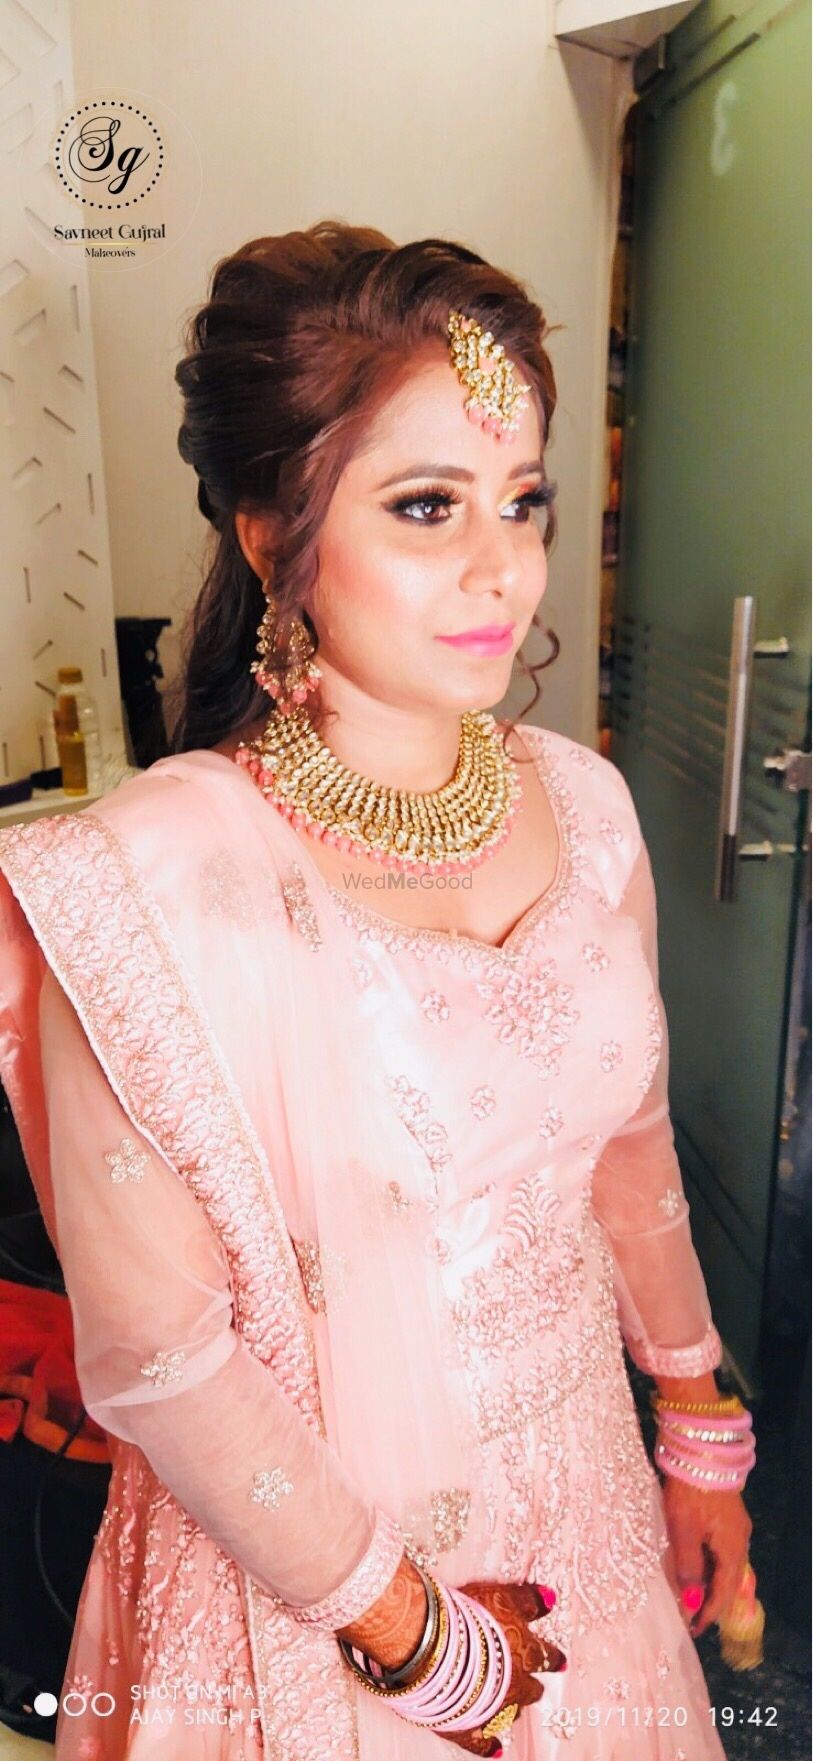 Photo From Jeet’s Engagement Look - By Savneet Gujral Makeovers